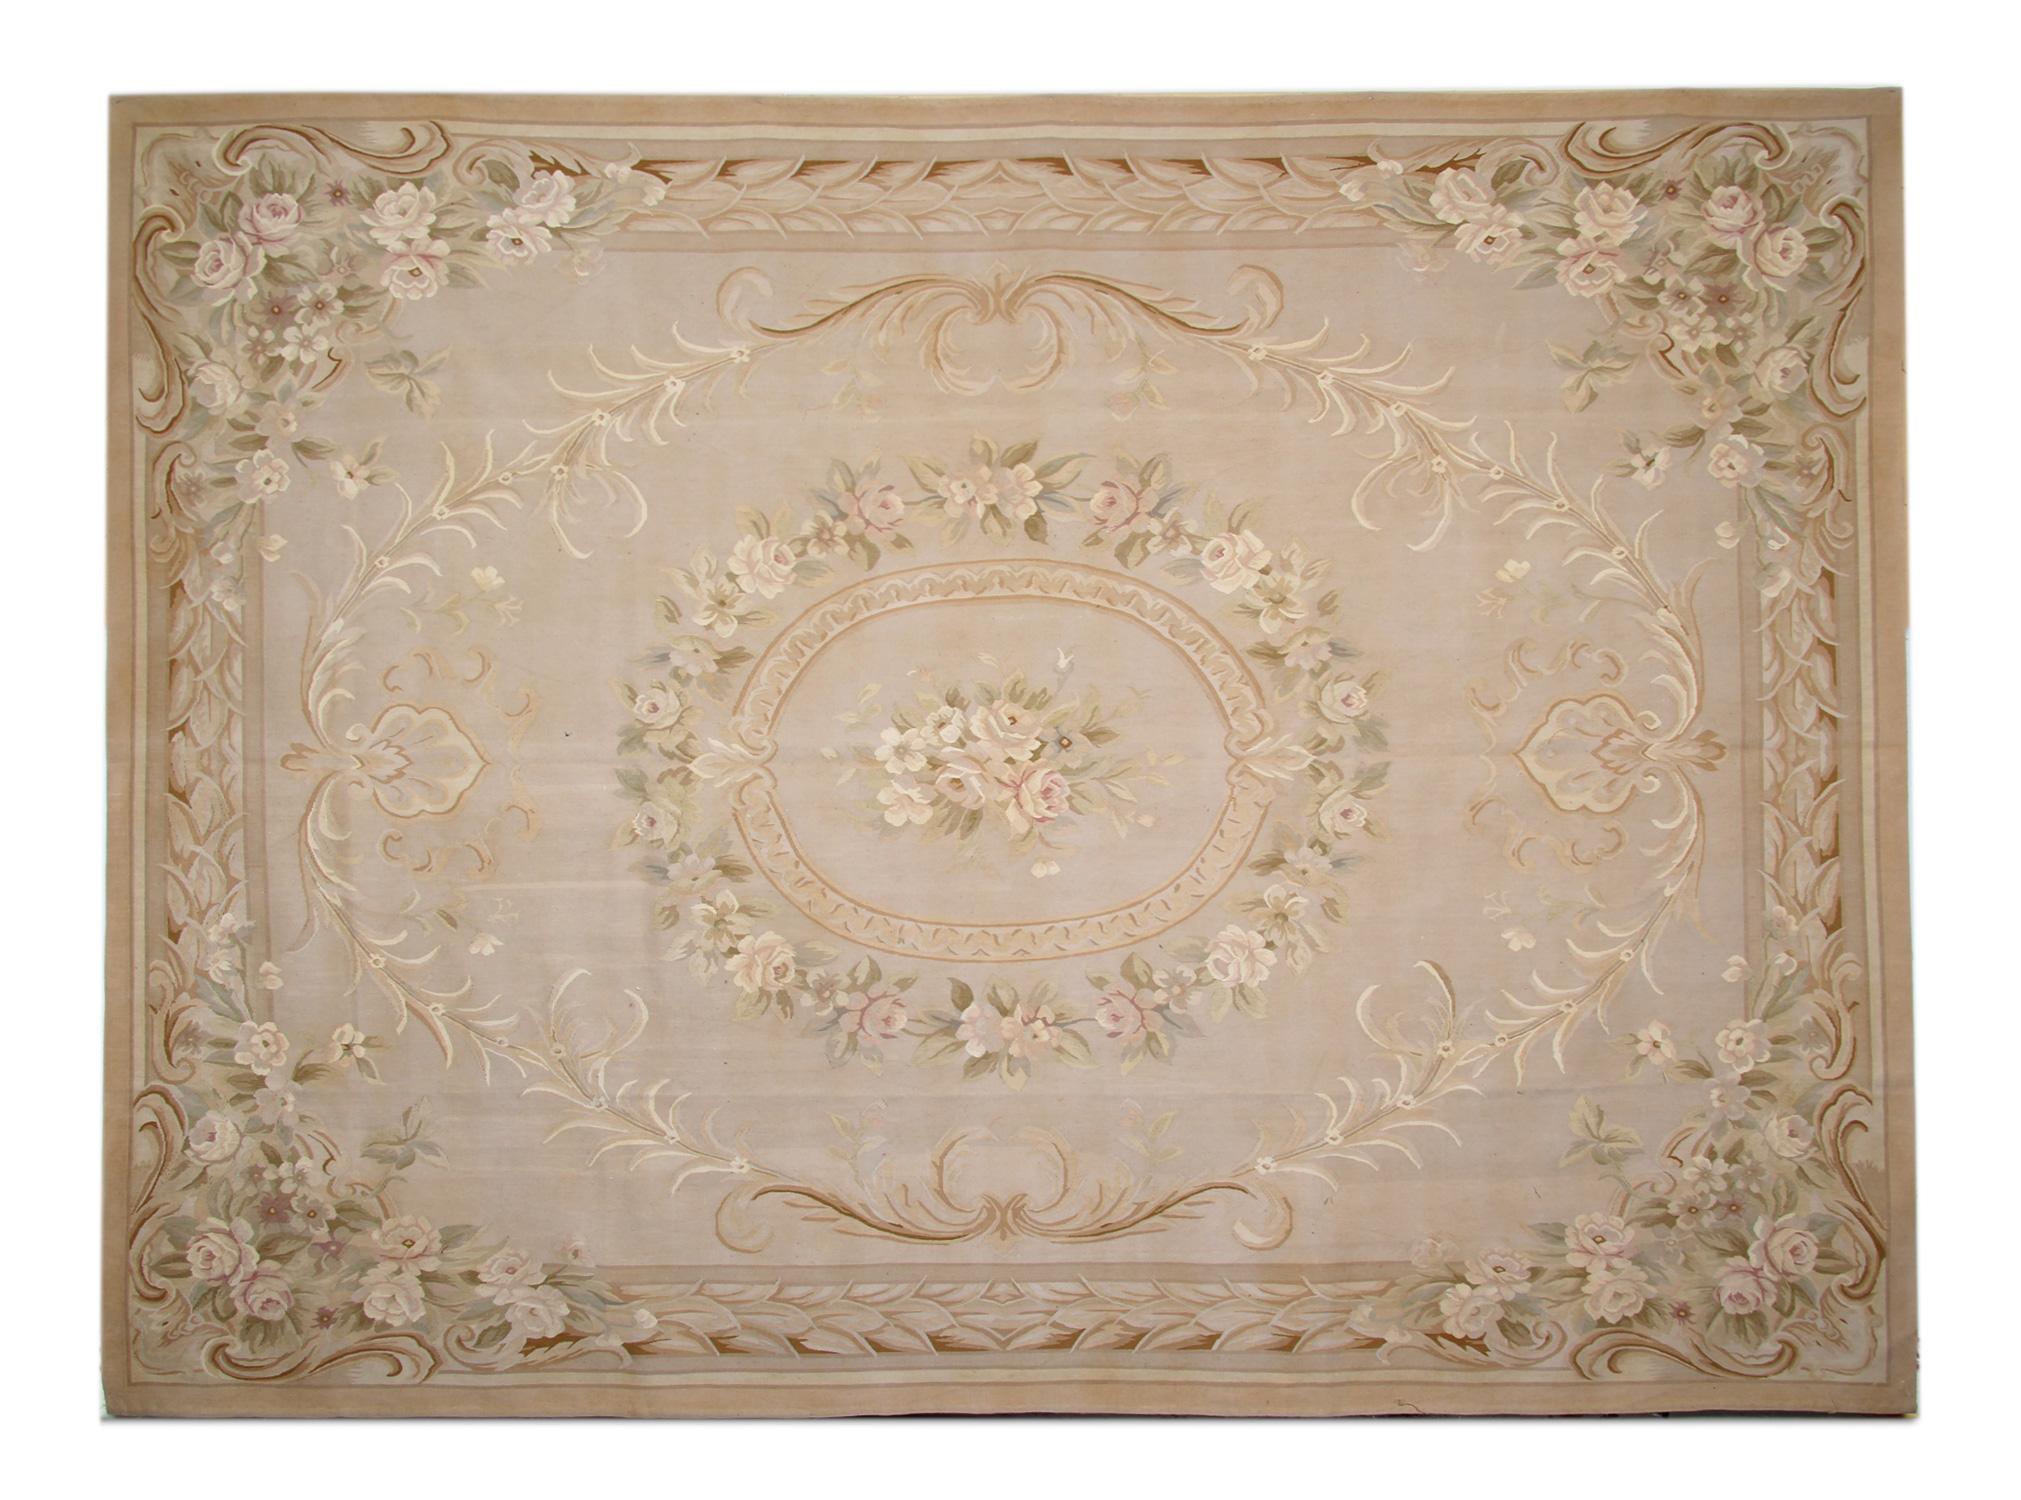 This fantastic area rug has been handwoven with a beautiful symmetrical floral design woven on a beige background with accents of cream green and ivory. Both the color and design of this elegant piece make it the perfect accent rug.
This style of